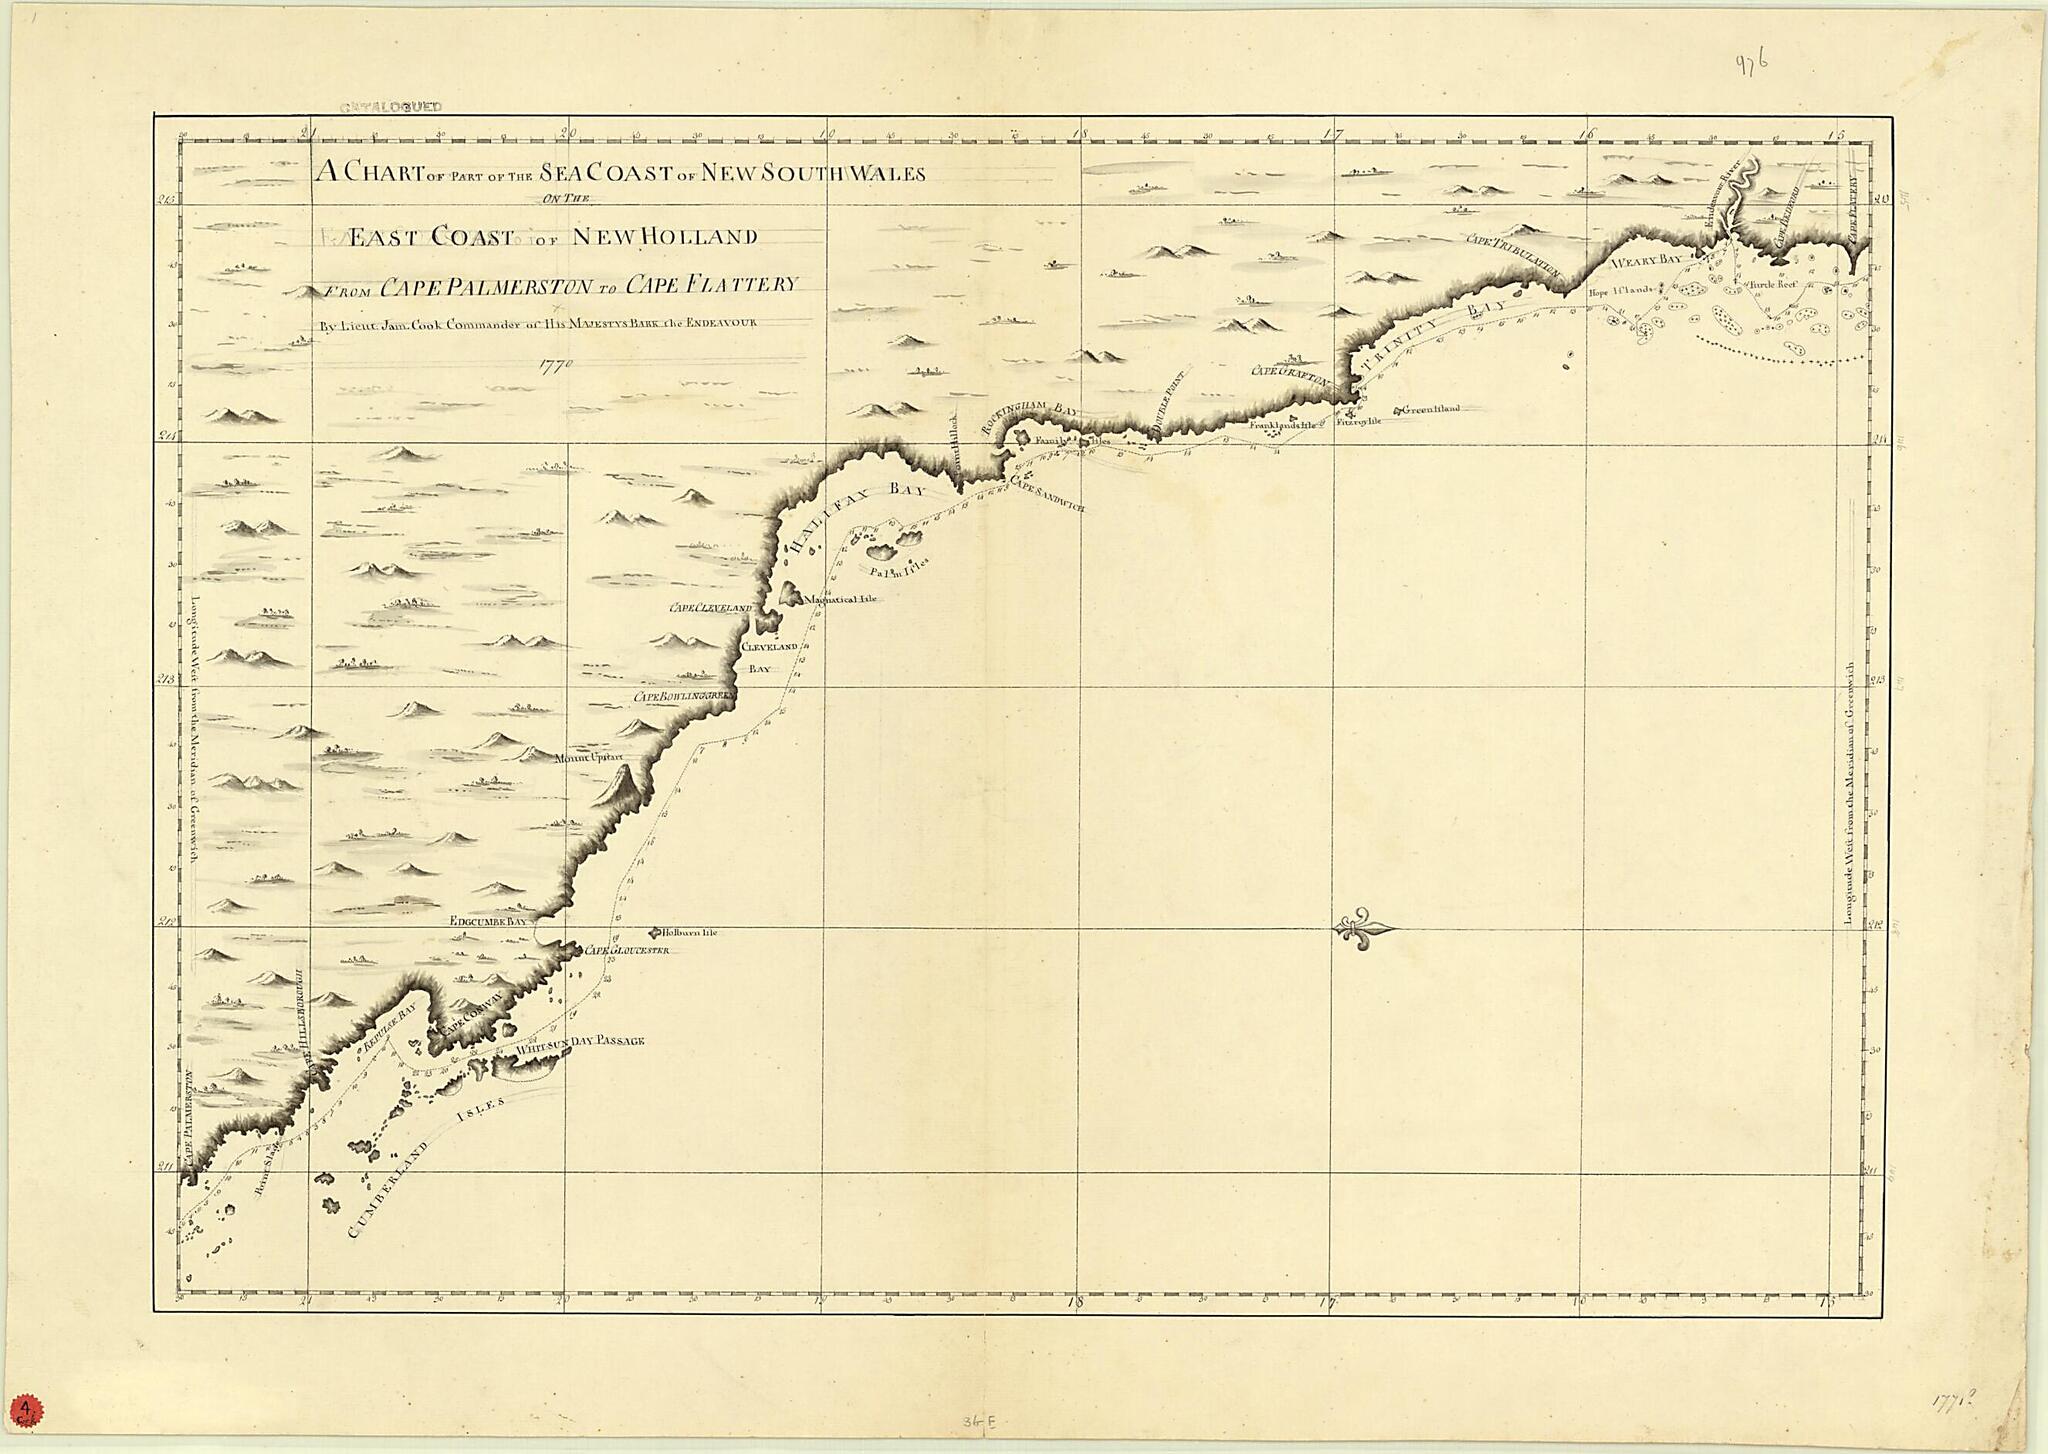 This old map of A Chart of Part of the Sea Coast of New South Wales On the East Coast of New Holland from Cape Palmerston to Cape Flattery from 1771 was created by James Cook in 1771